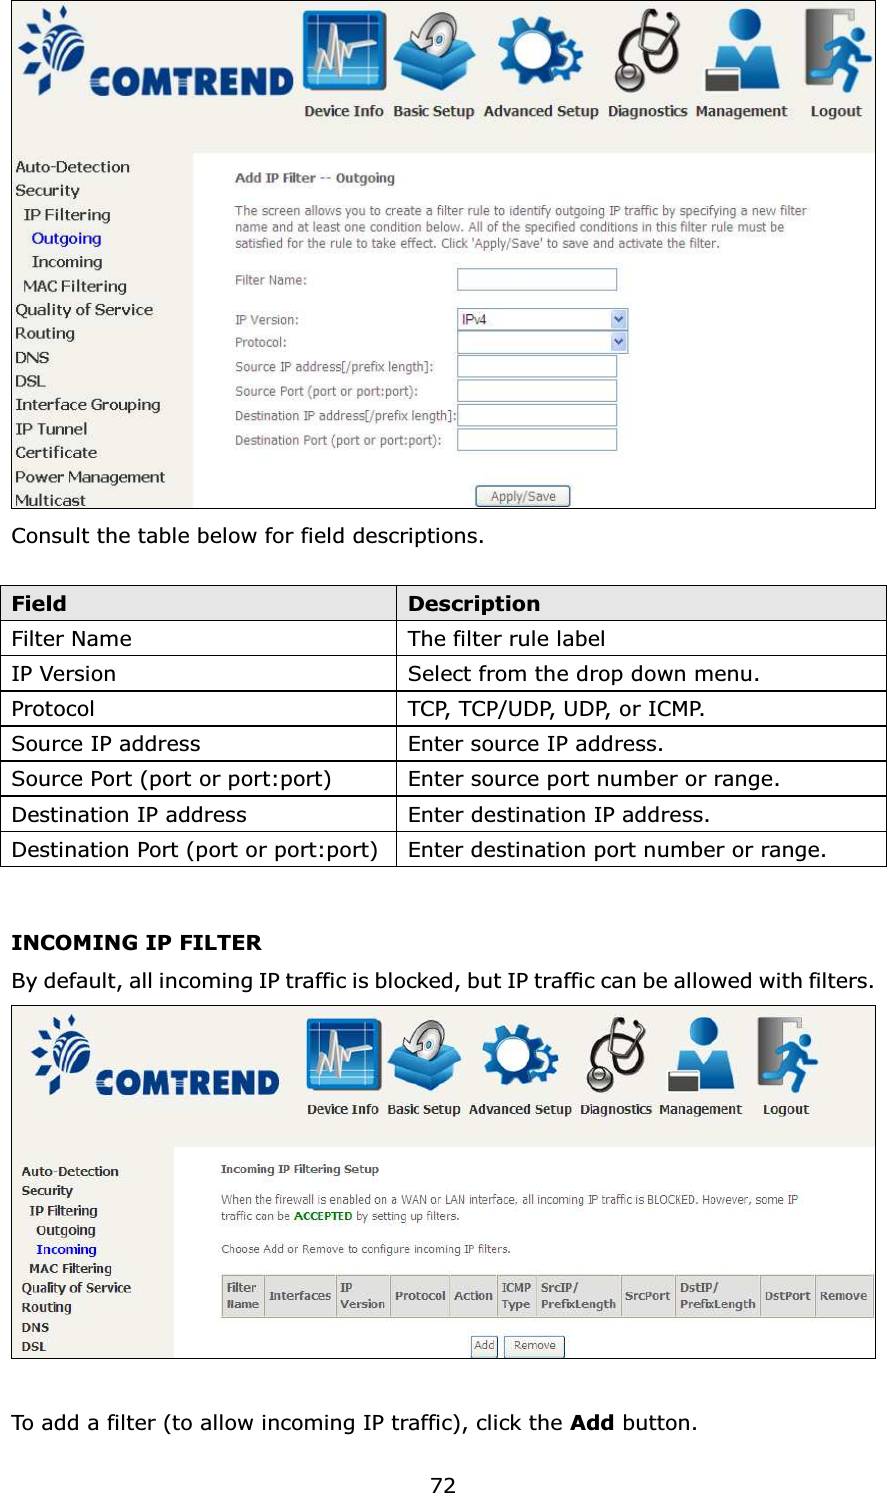  72 Consult the table below for field descriptions.  Field  Description Filter Name  The filter rule label IP Version  Select from the drop down menu. Protocol  TC P,  T C P / U D P,  U D P,  o r  I C M P.  Source IP address  Enter source IP address. Source Port (port or port:port)  Enter source port number or range. Destination IP address  Enter destination IP address. Destination Port (port or port:port) Enter destination port number or range.  INCOMING IP FILTER By default, all incoming IP traffic is blocked, but IP traffic can be allowed with filters.   To add a filter (to allow incoming IP traffic), click the Add button.   